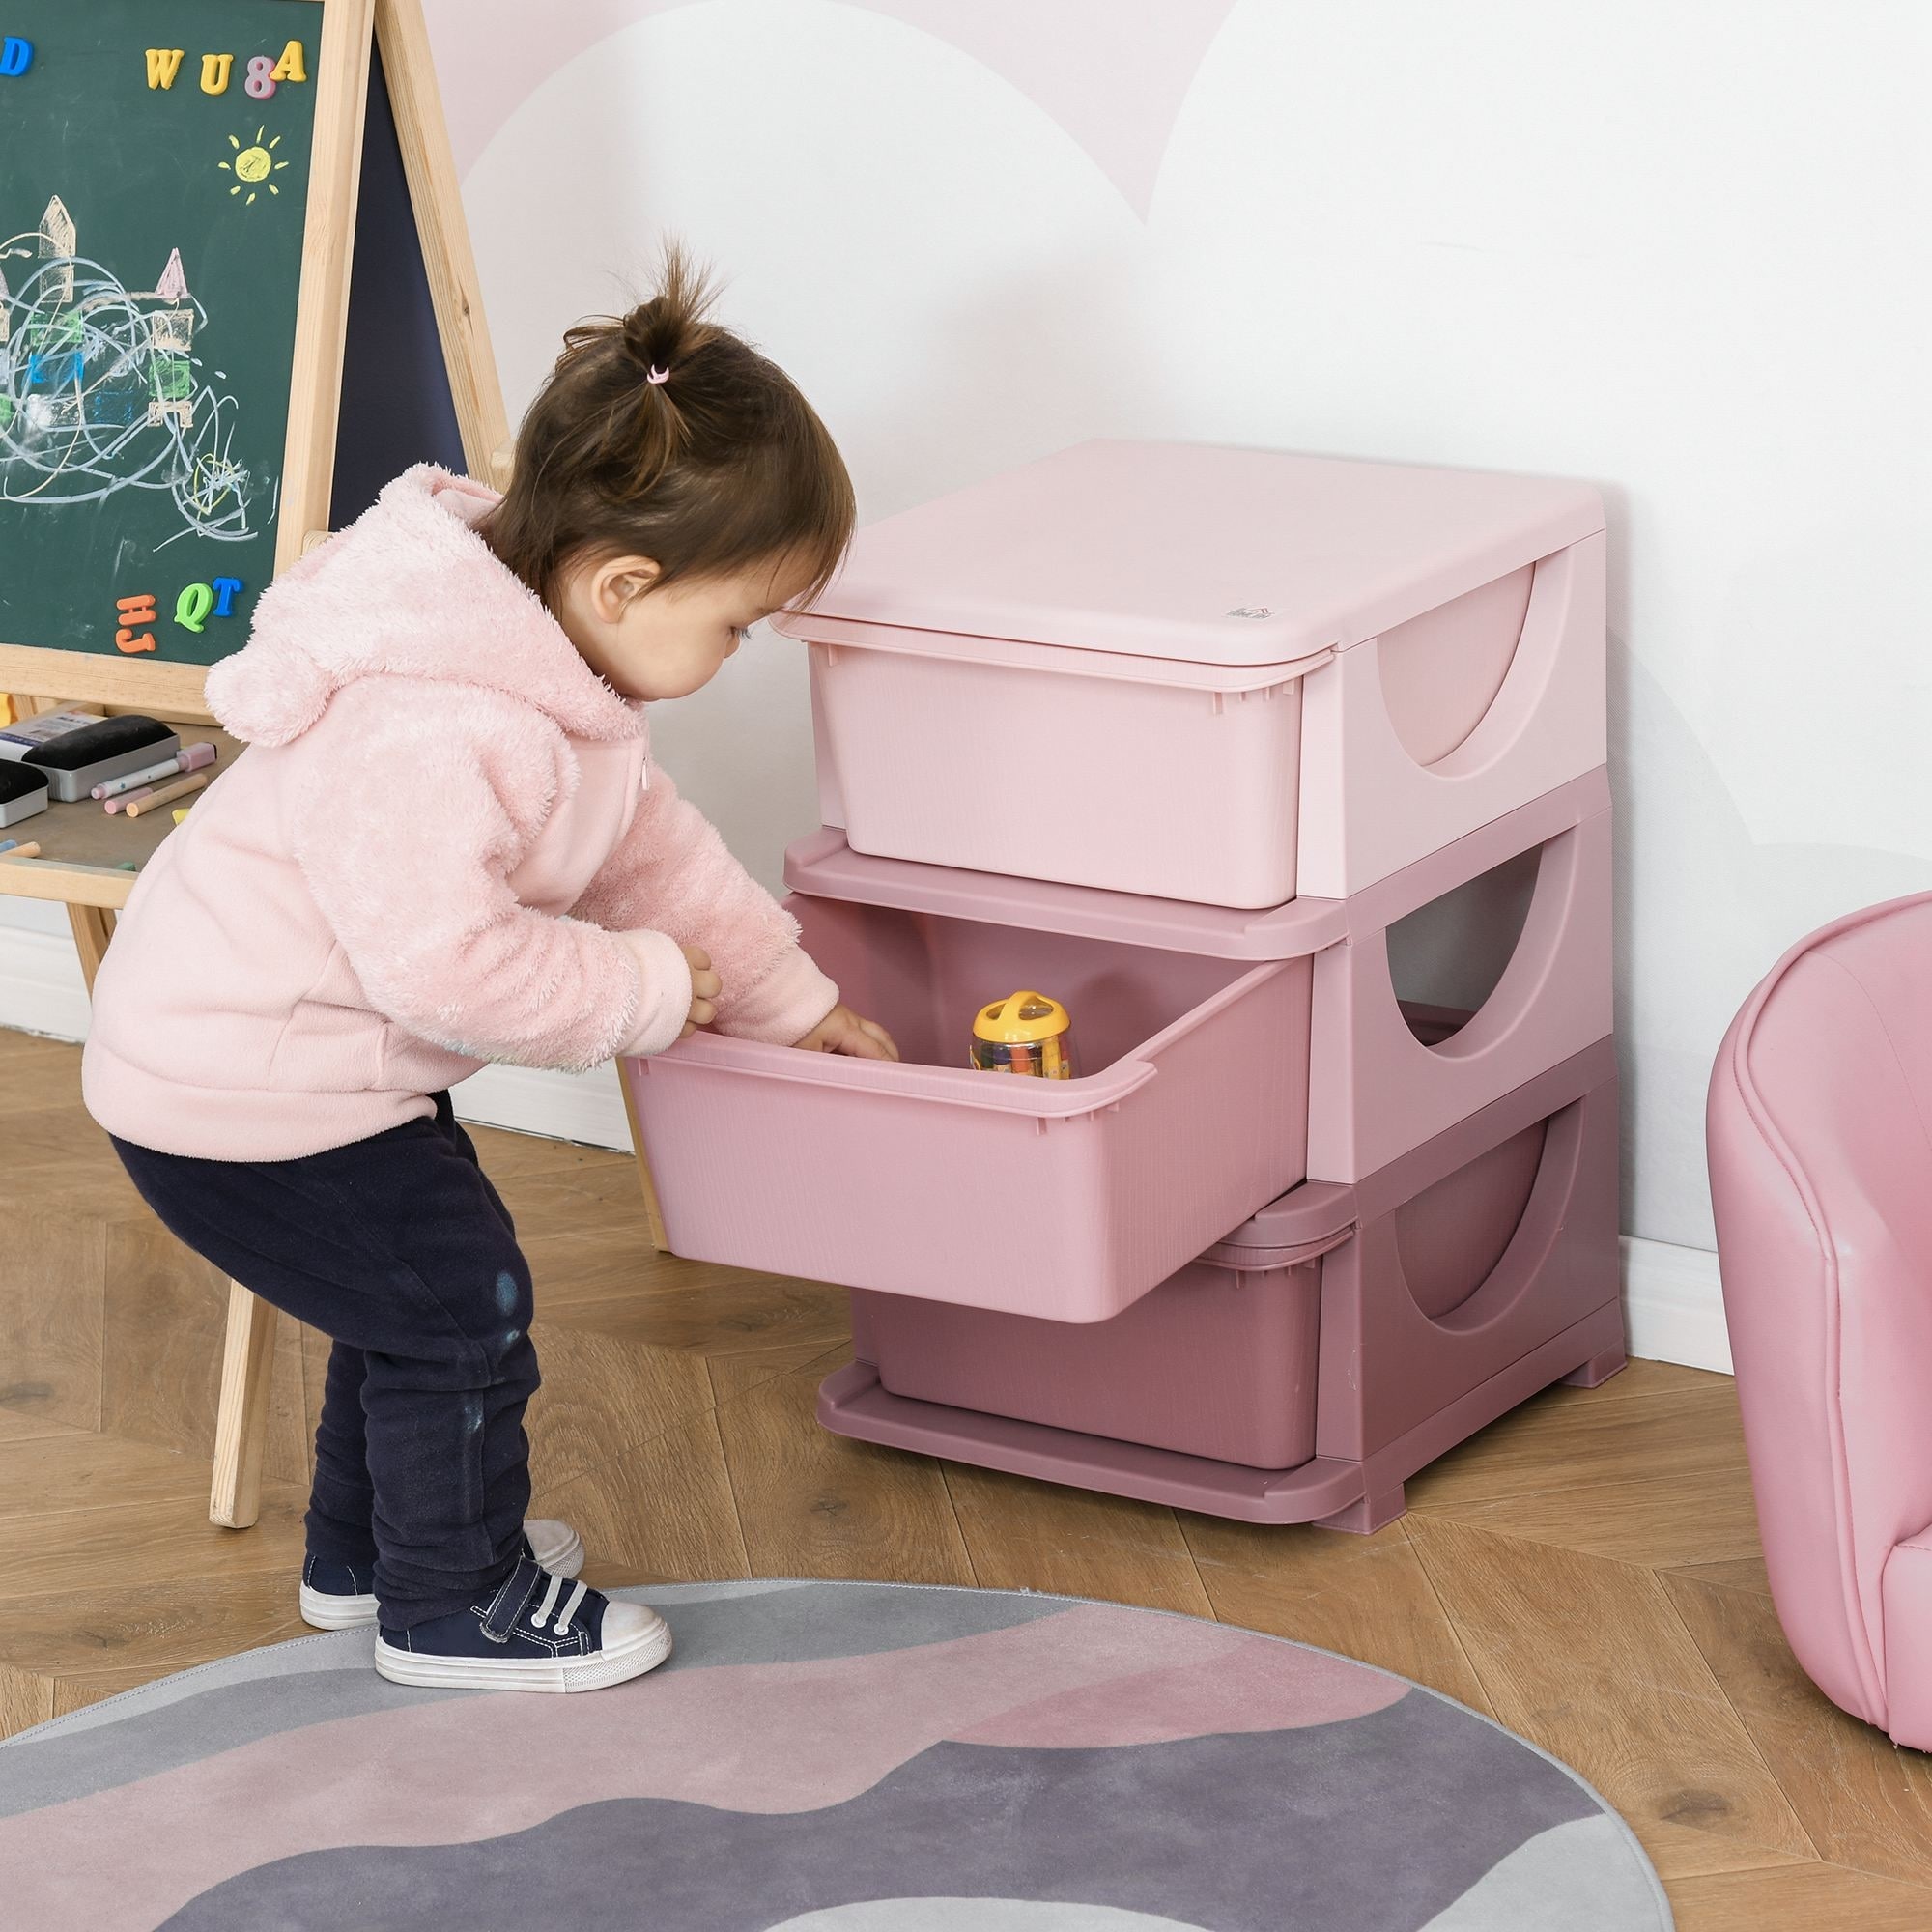 https://ak1.ostkcdn.com/images/products/is/images/direct/0d51d3c74dc10252039b338e1ce42ea2545f4c52/Qaba-Kids-Storage-Unit-Dresser-Tower-with-Drawers-3-Tier-Chest-Toy-Organizer-for-Bedroom-Kindergarten-for-Boys-Girls-Toddlers.jpg